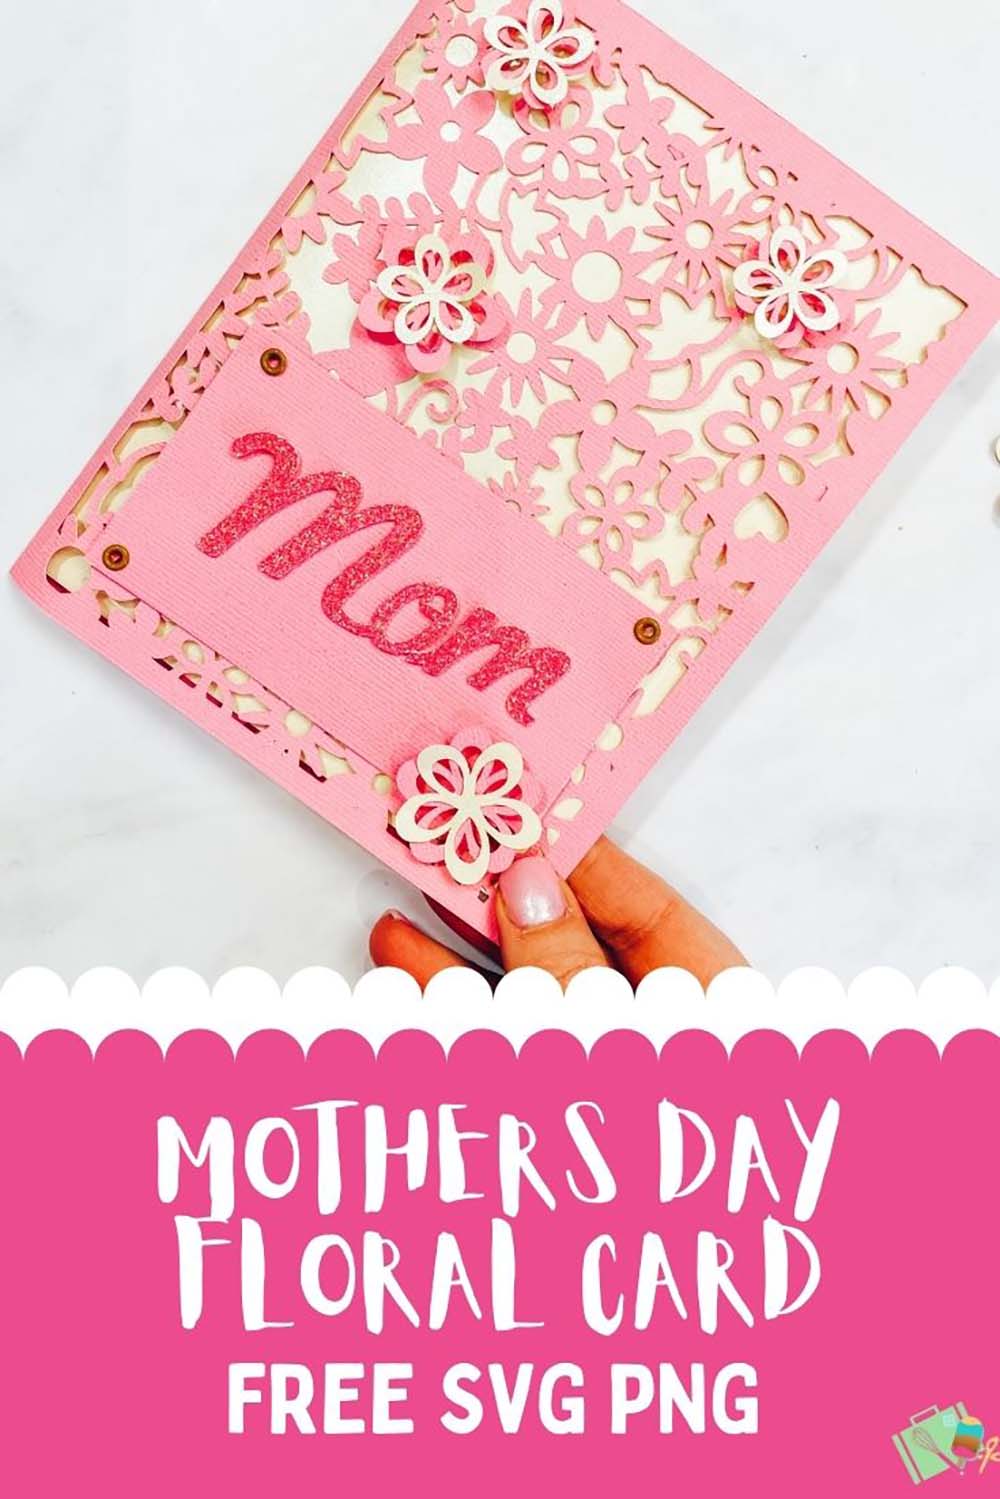 Floral Mothers Day CArd